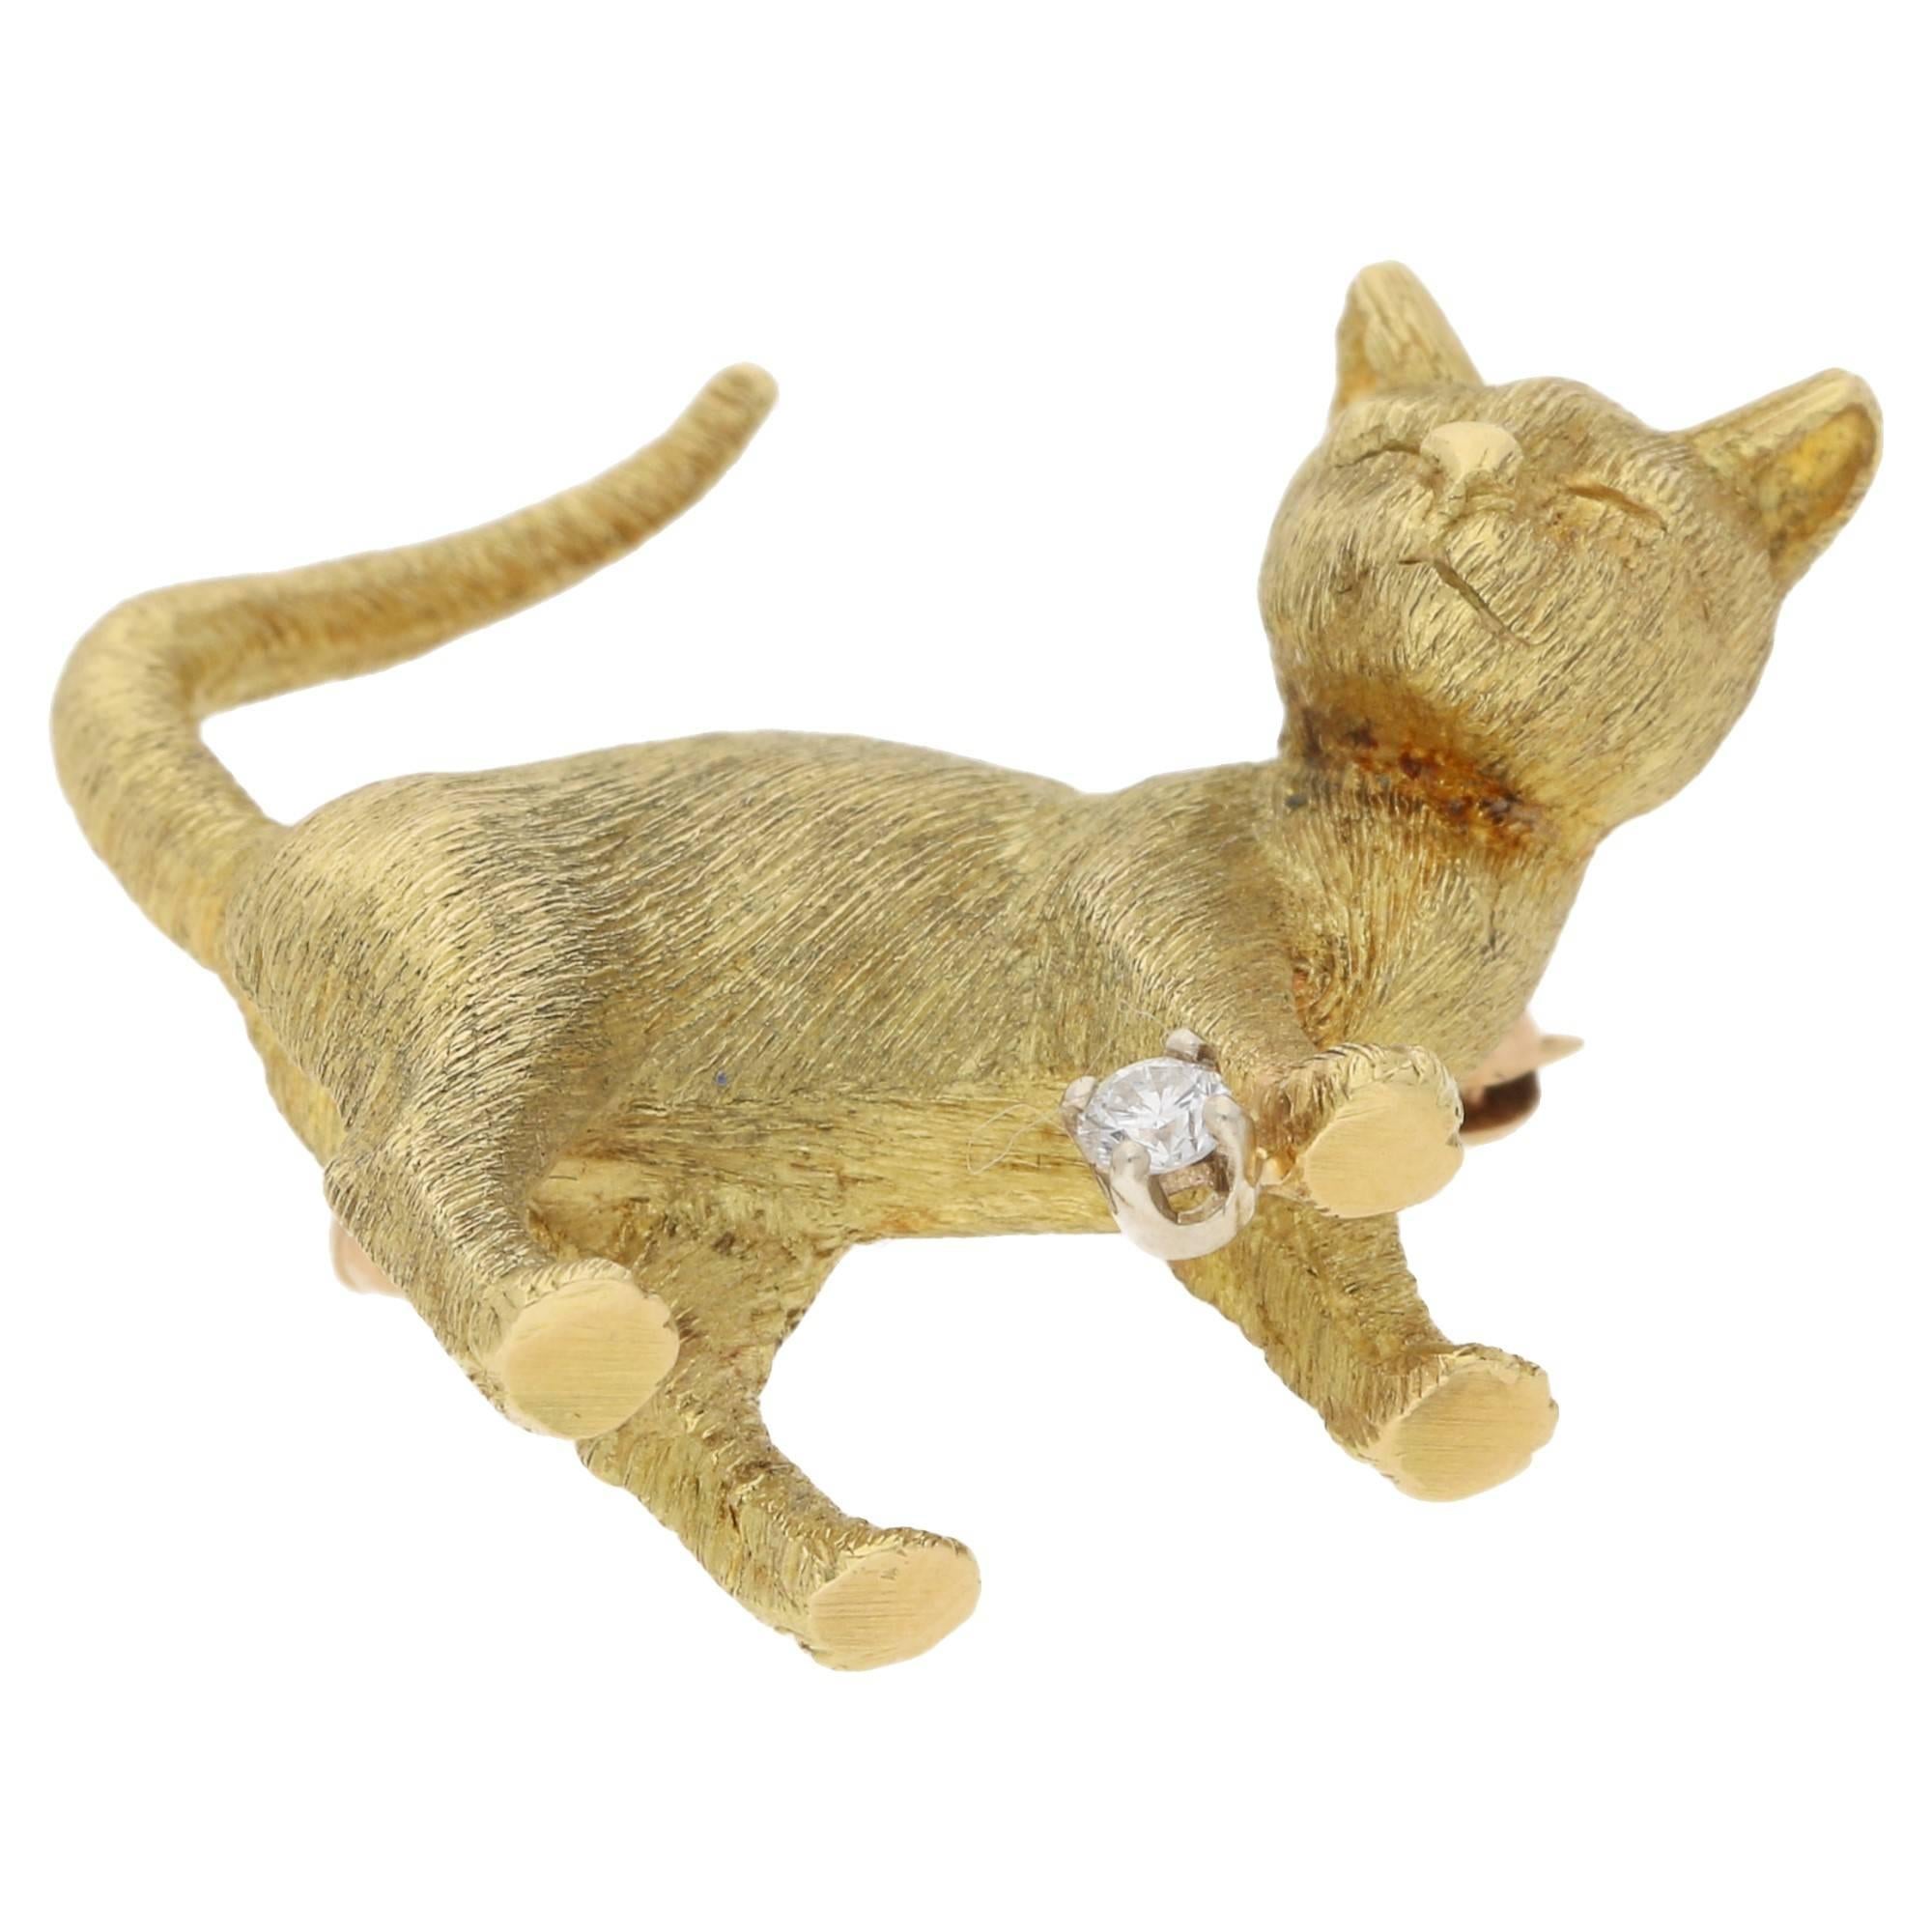 A whimsical 18ct yellow gold and diamond hand carved cat brooch. The hand tooled cat displays a florentine effect to the gold surface and is playing with a small round brilliant cut diamond four-claw set in platinum. Estimated diamond weight: 0.05.